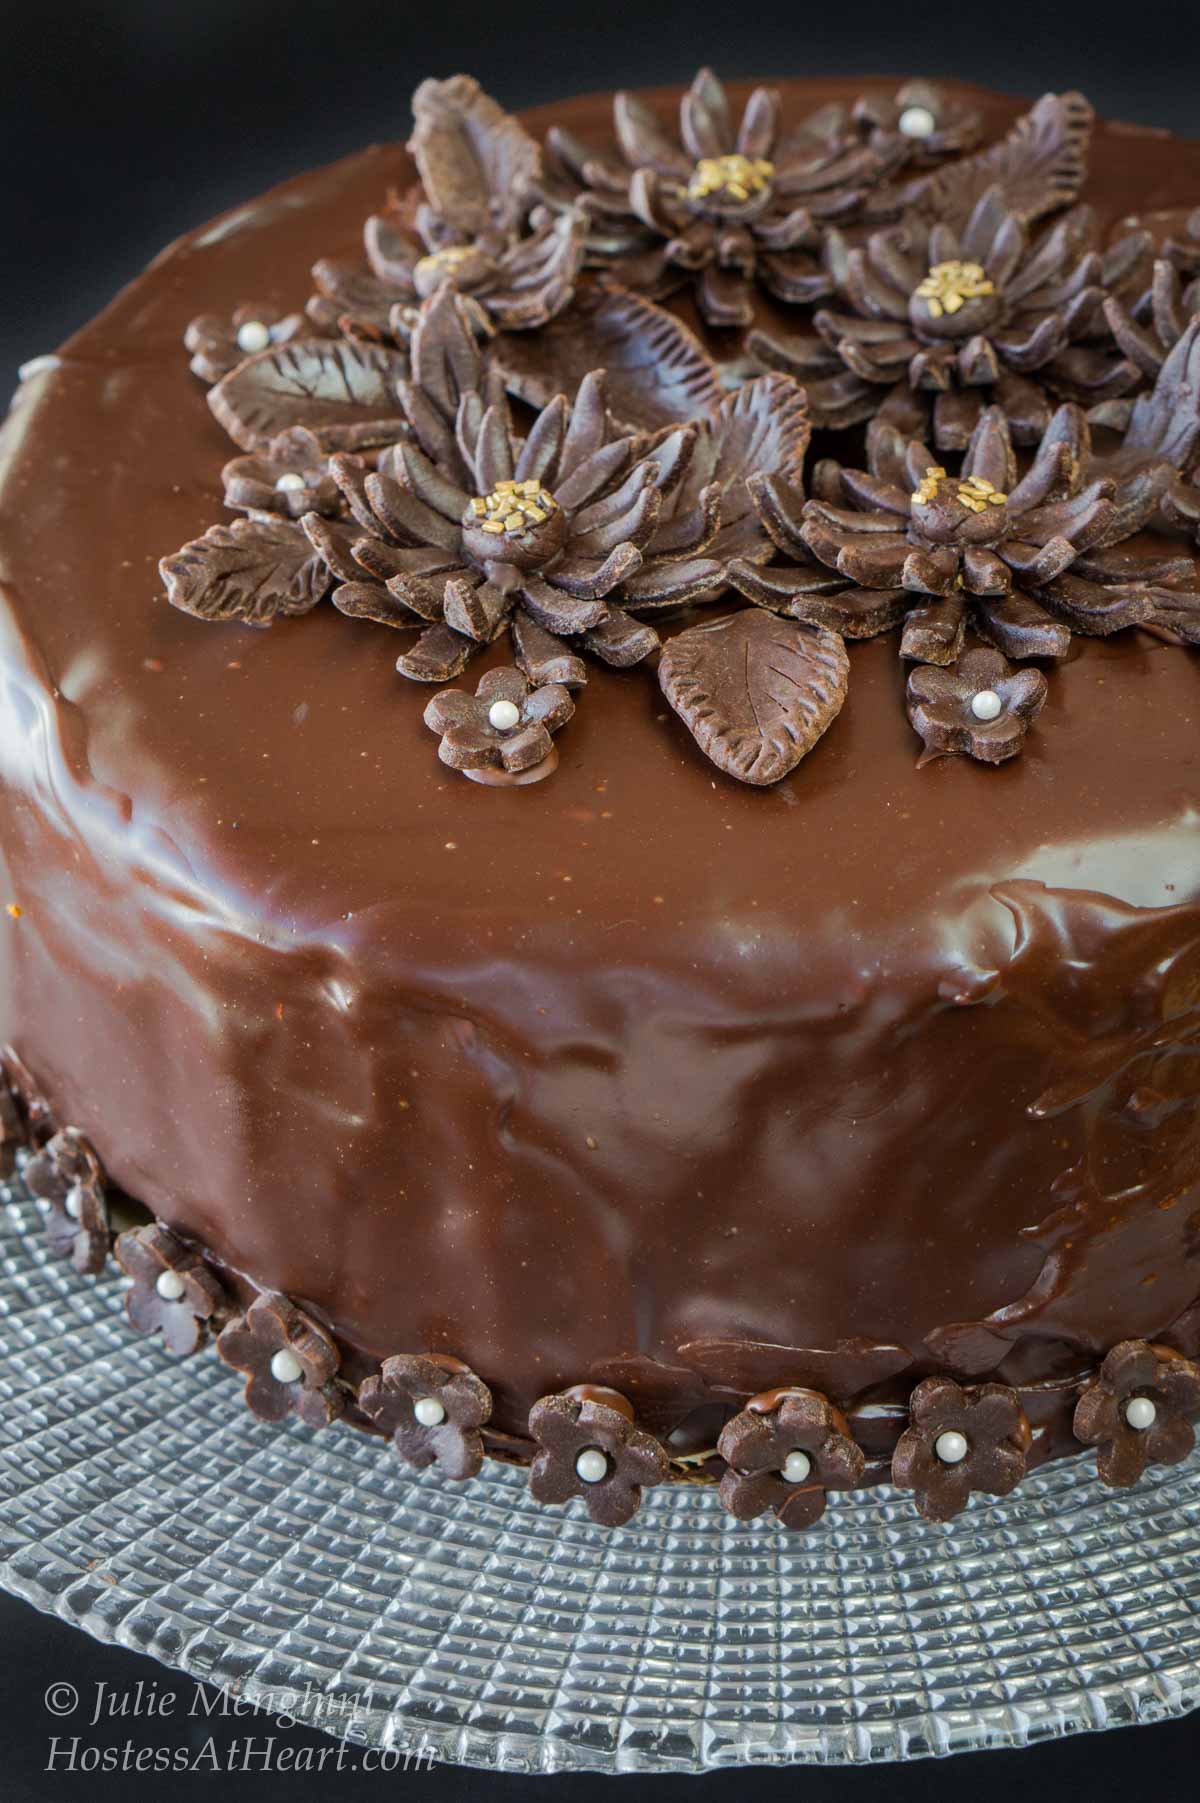 Beautiful round chocolate cake with a shiny ganache decorated with chocolate flowers.